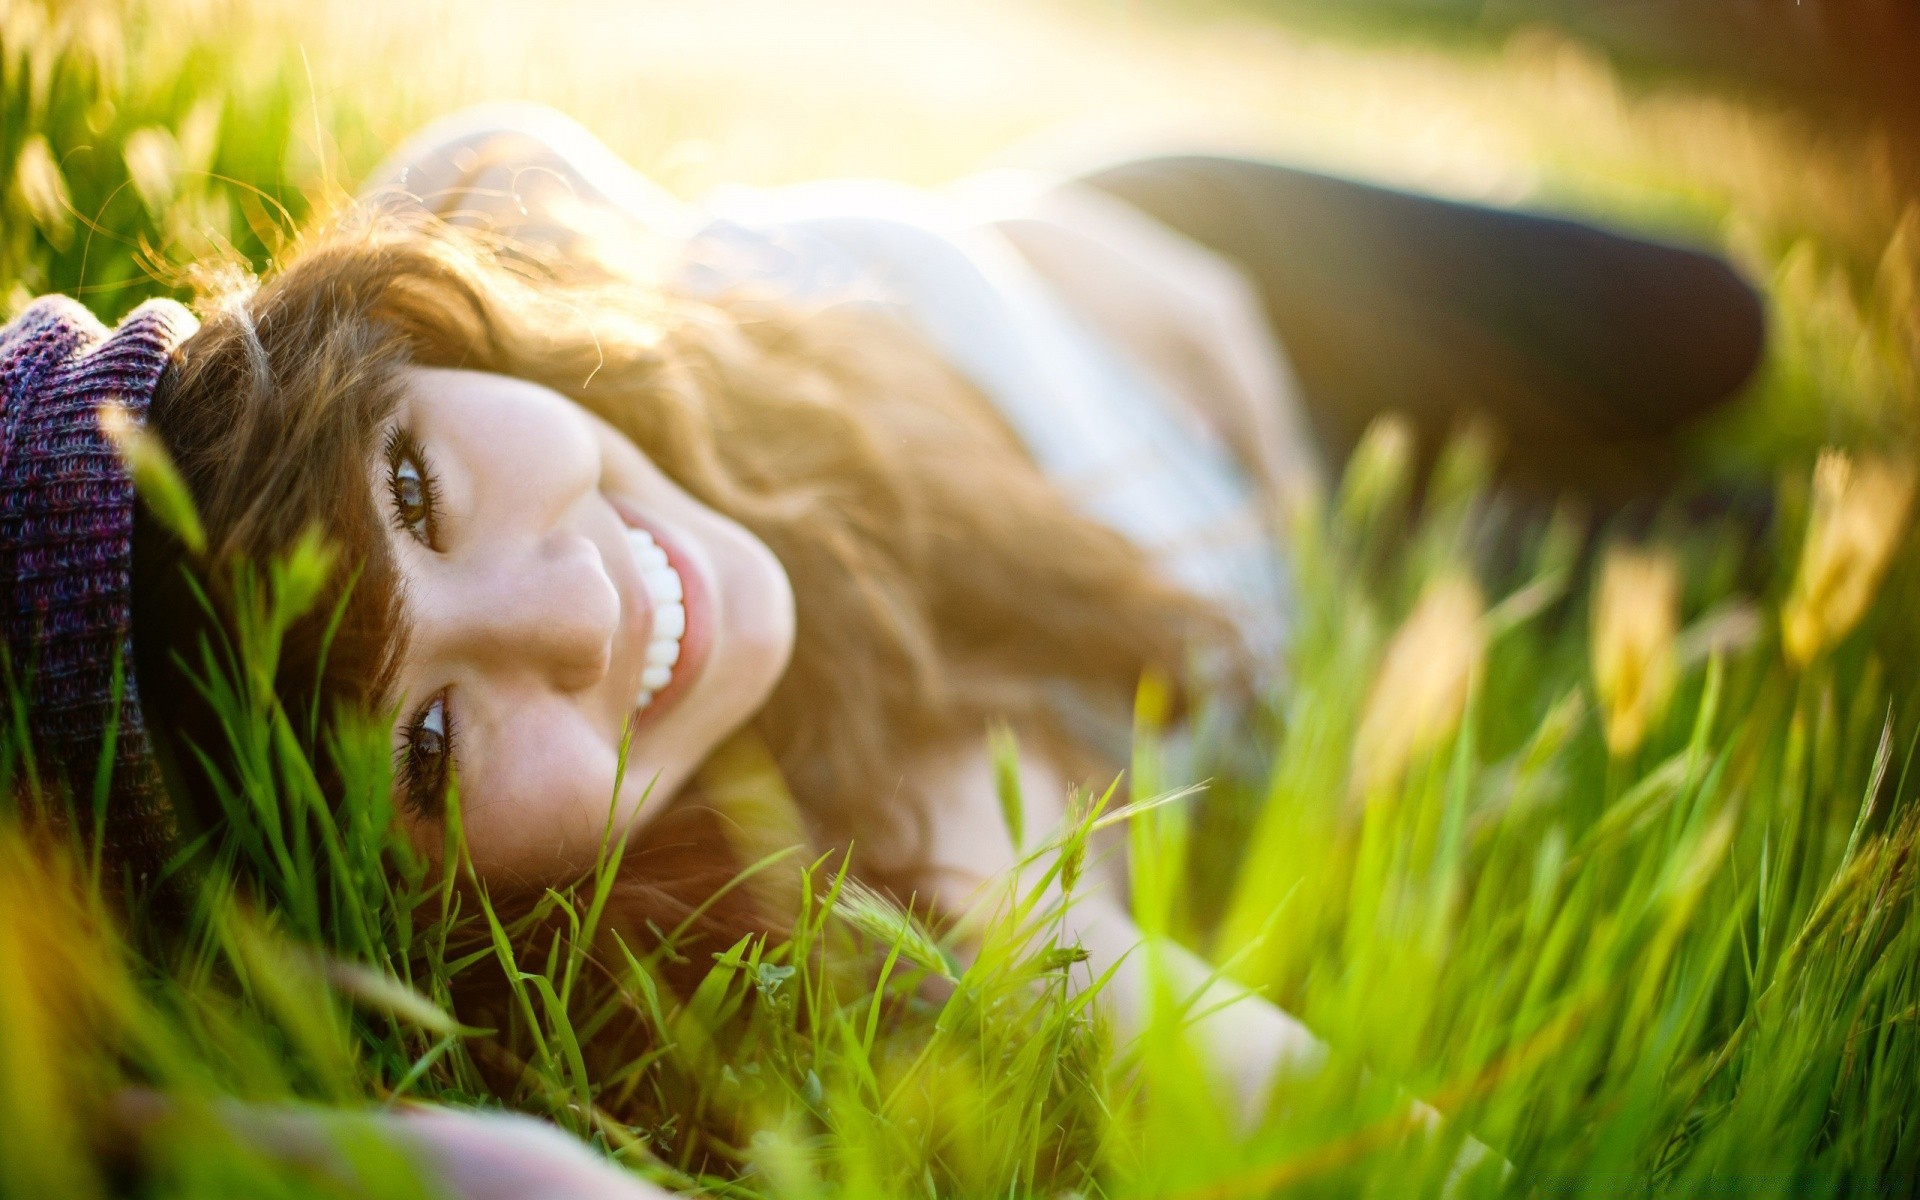 face and smile grass nature summer field outdoors hayfield fair weather beautiful sun relaxation park cute leisure